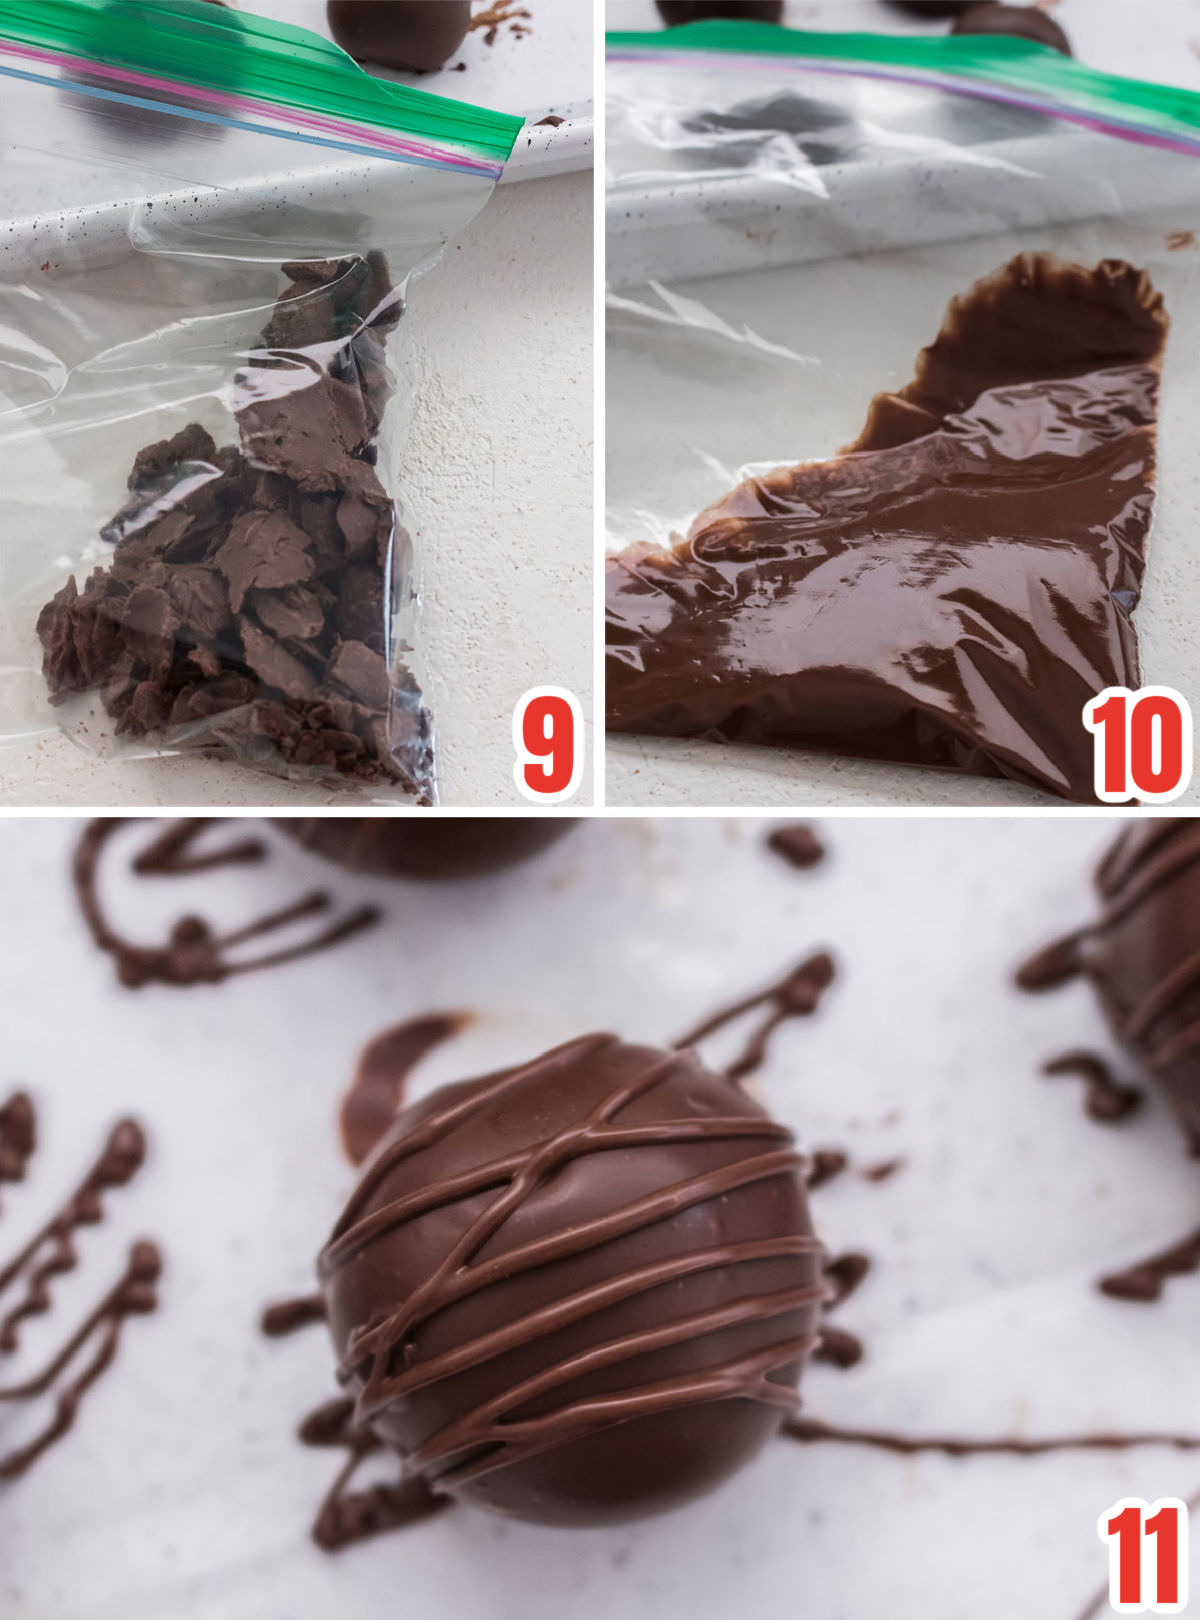 Collage image showing how to add a decorative drizzle of chocolate to the tops of the of Peanut Butter Balls.